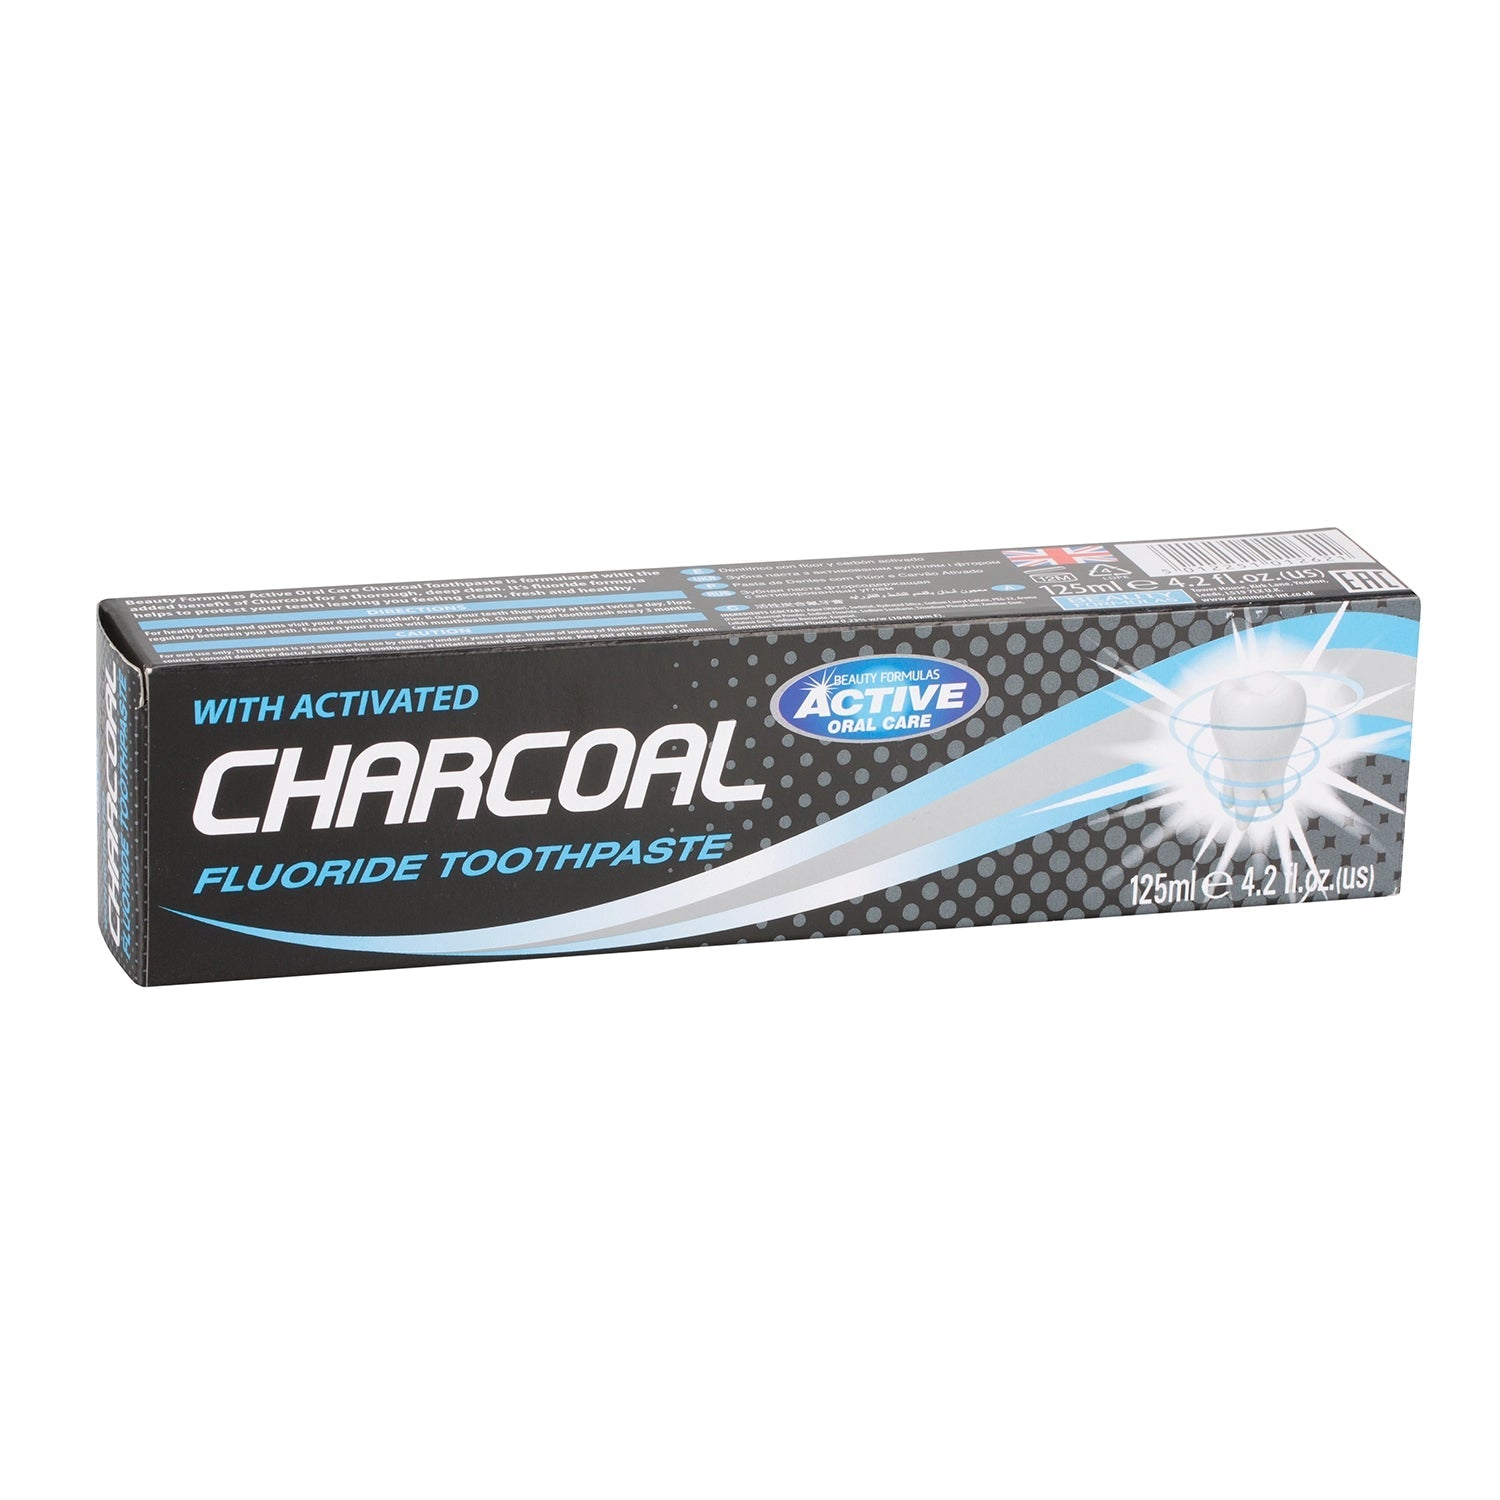 Beauty Formulas 125ml Active Charcoal Toothpaste - Intamarque 5012251012621